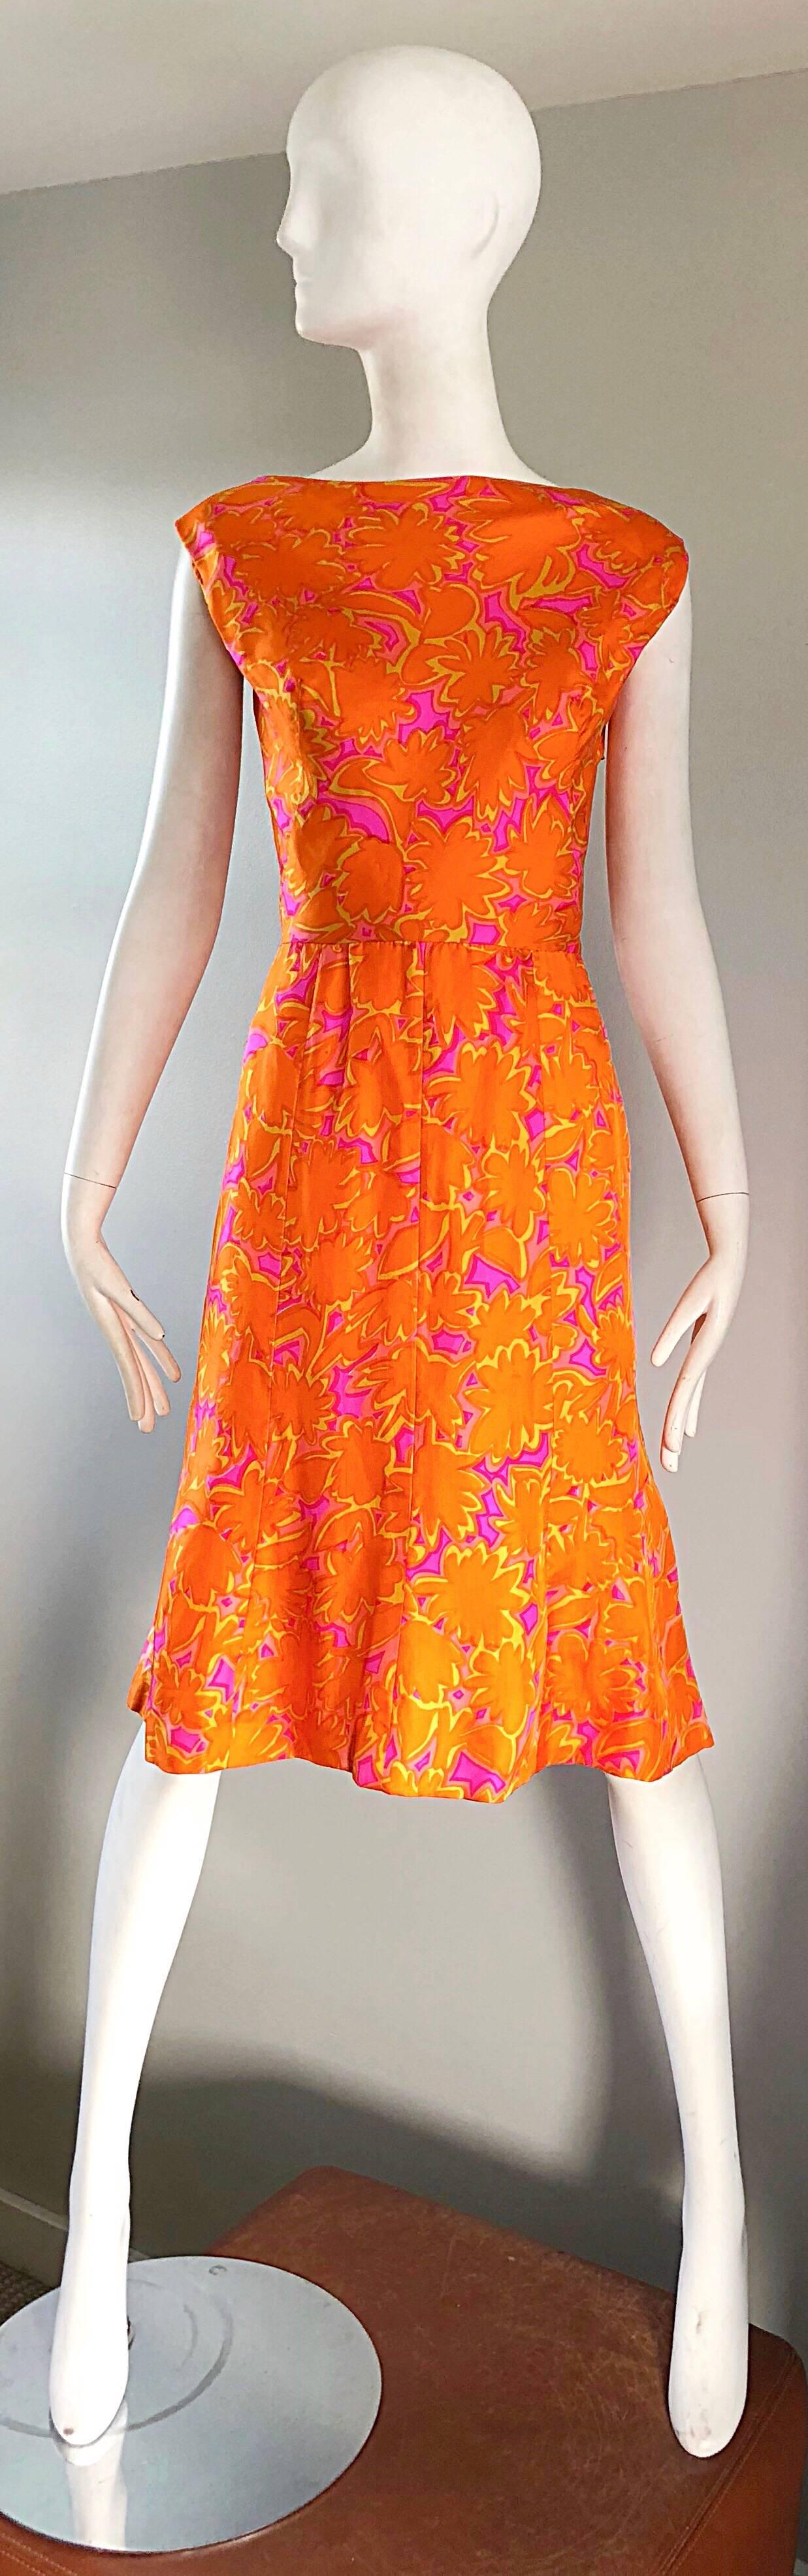 Beautiful vintage 1960s bright neon orange and hot pink printed silk A-Line dress! Features a flattering high boat neck, with a fabulous dipped draped back. Cap sleeves cover just the right amount of arms for year round. Fitted bodice, with a full